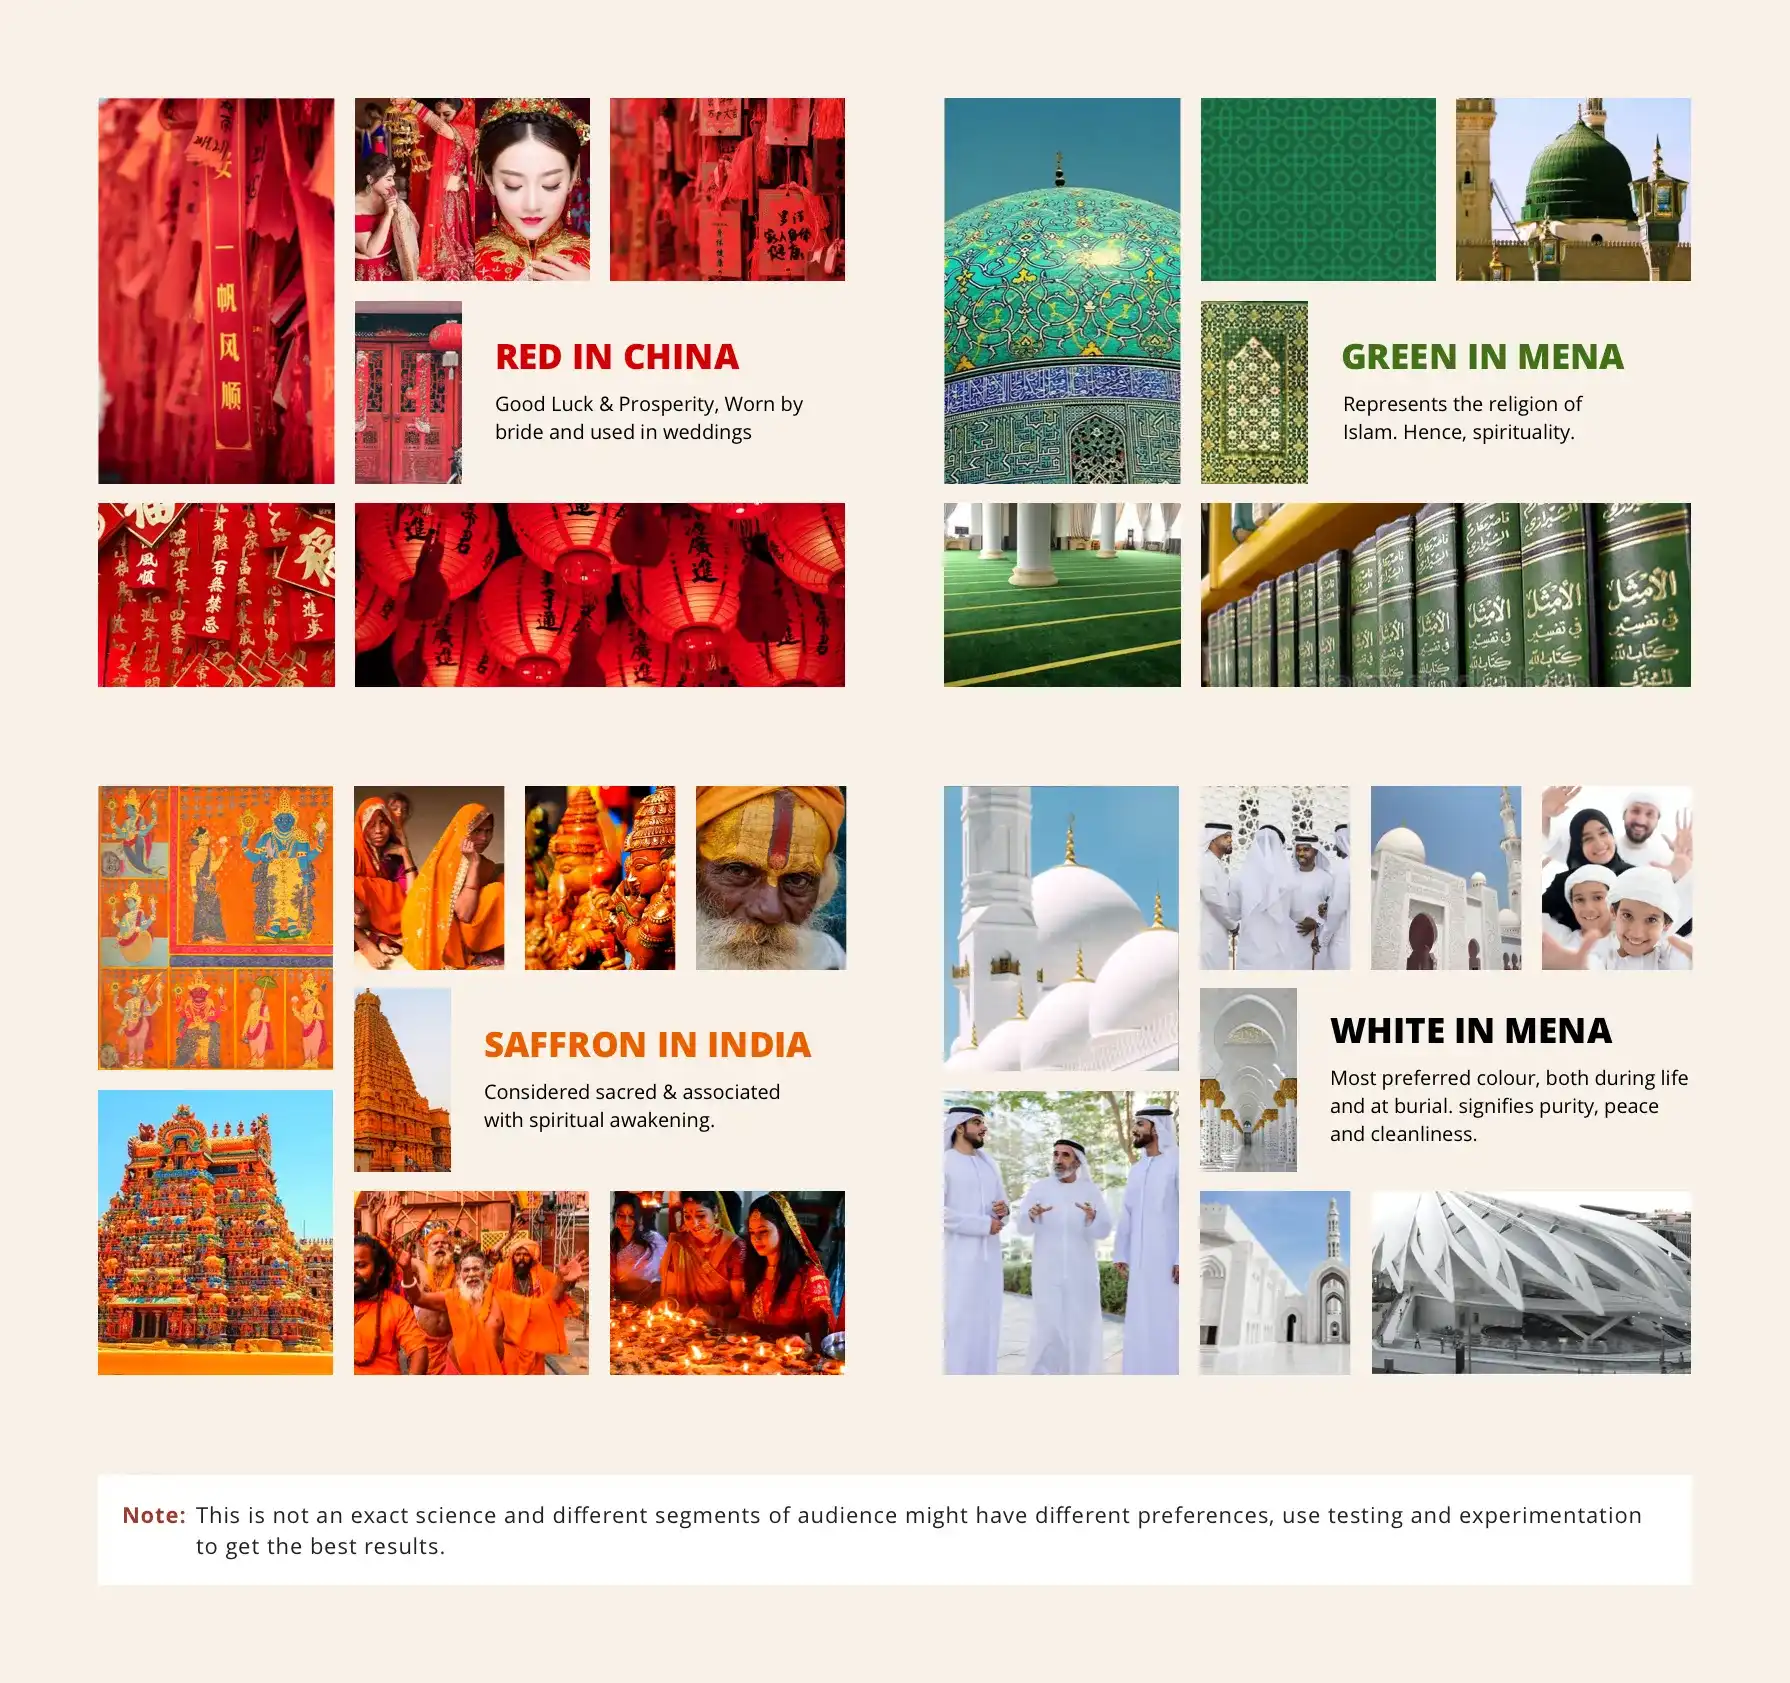 A collage of four moodboards featuring colors commonly used in branding in different regions: Red in China, Green in the Middle East and North Africa (MENA) region, White in the MENA region, and Saffron in India. Each moodboard includes images and annotations explaining the cultural and regional associations of the color. Image by Naif Ekkeri from wowstudio.io